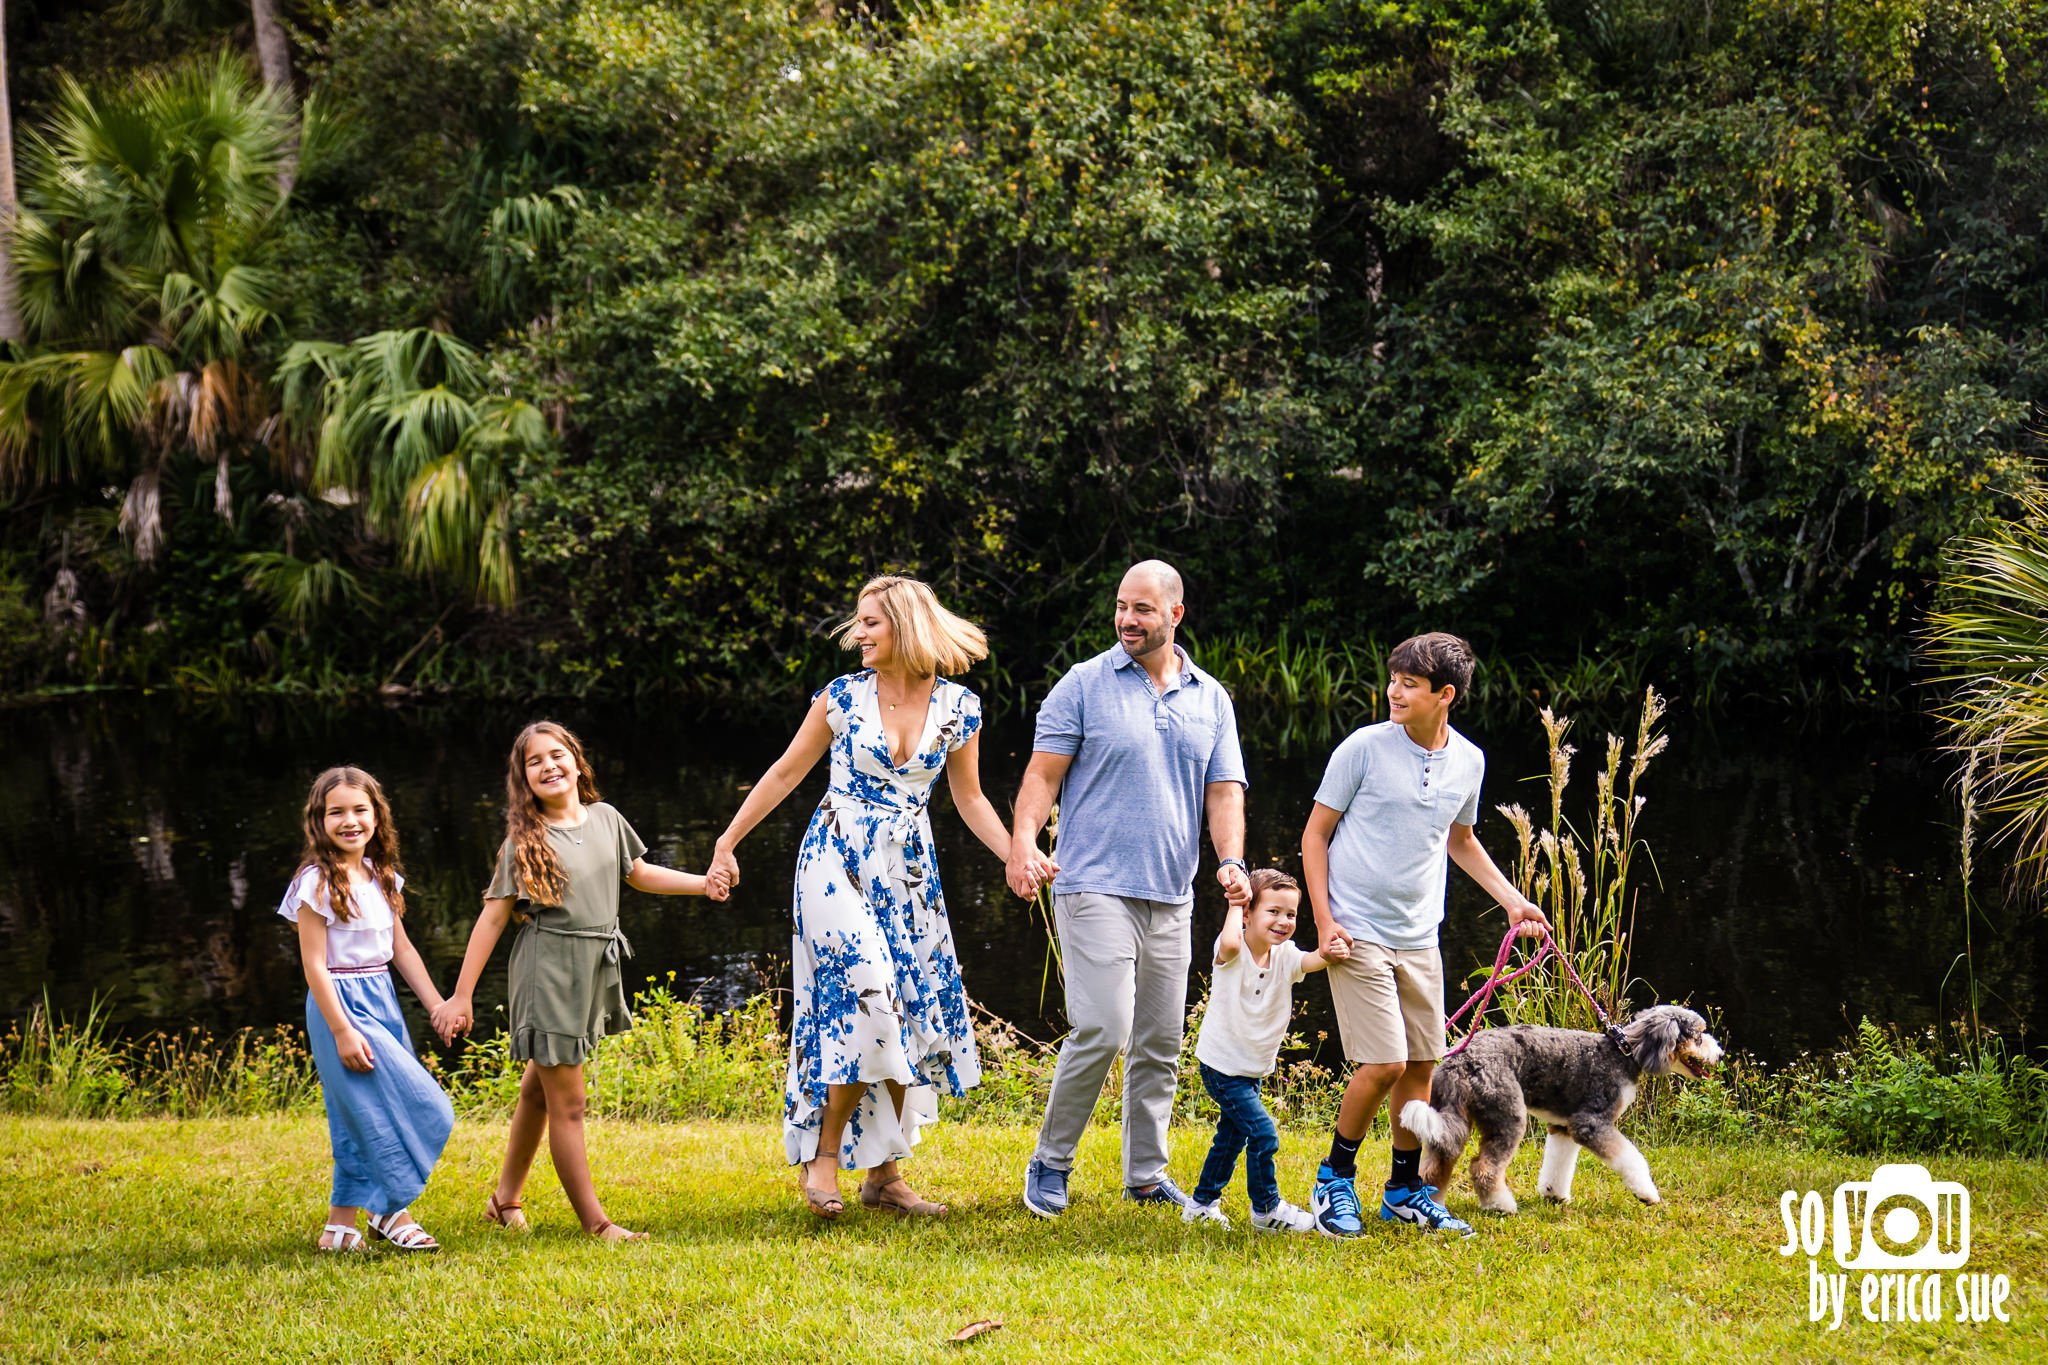 18-lifestyle-family-photographer-riverbend-park-jupiter-fl-so-you-by-erica-sue-ES1_8653.JPG